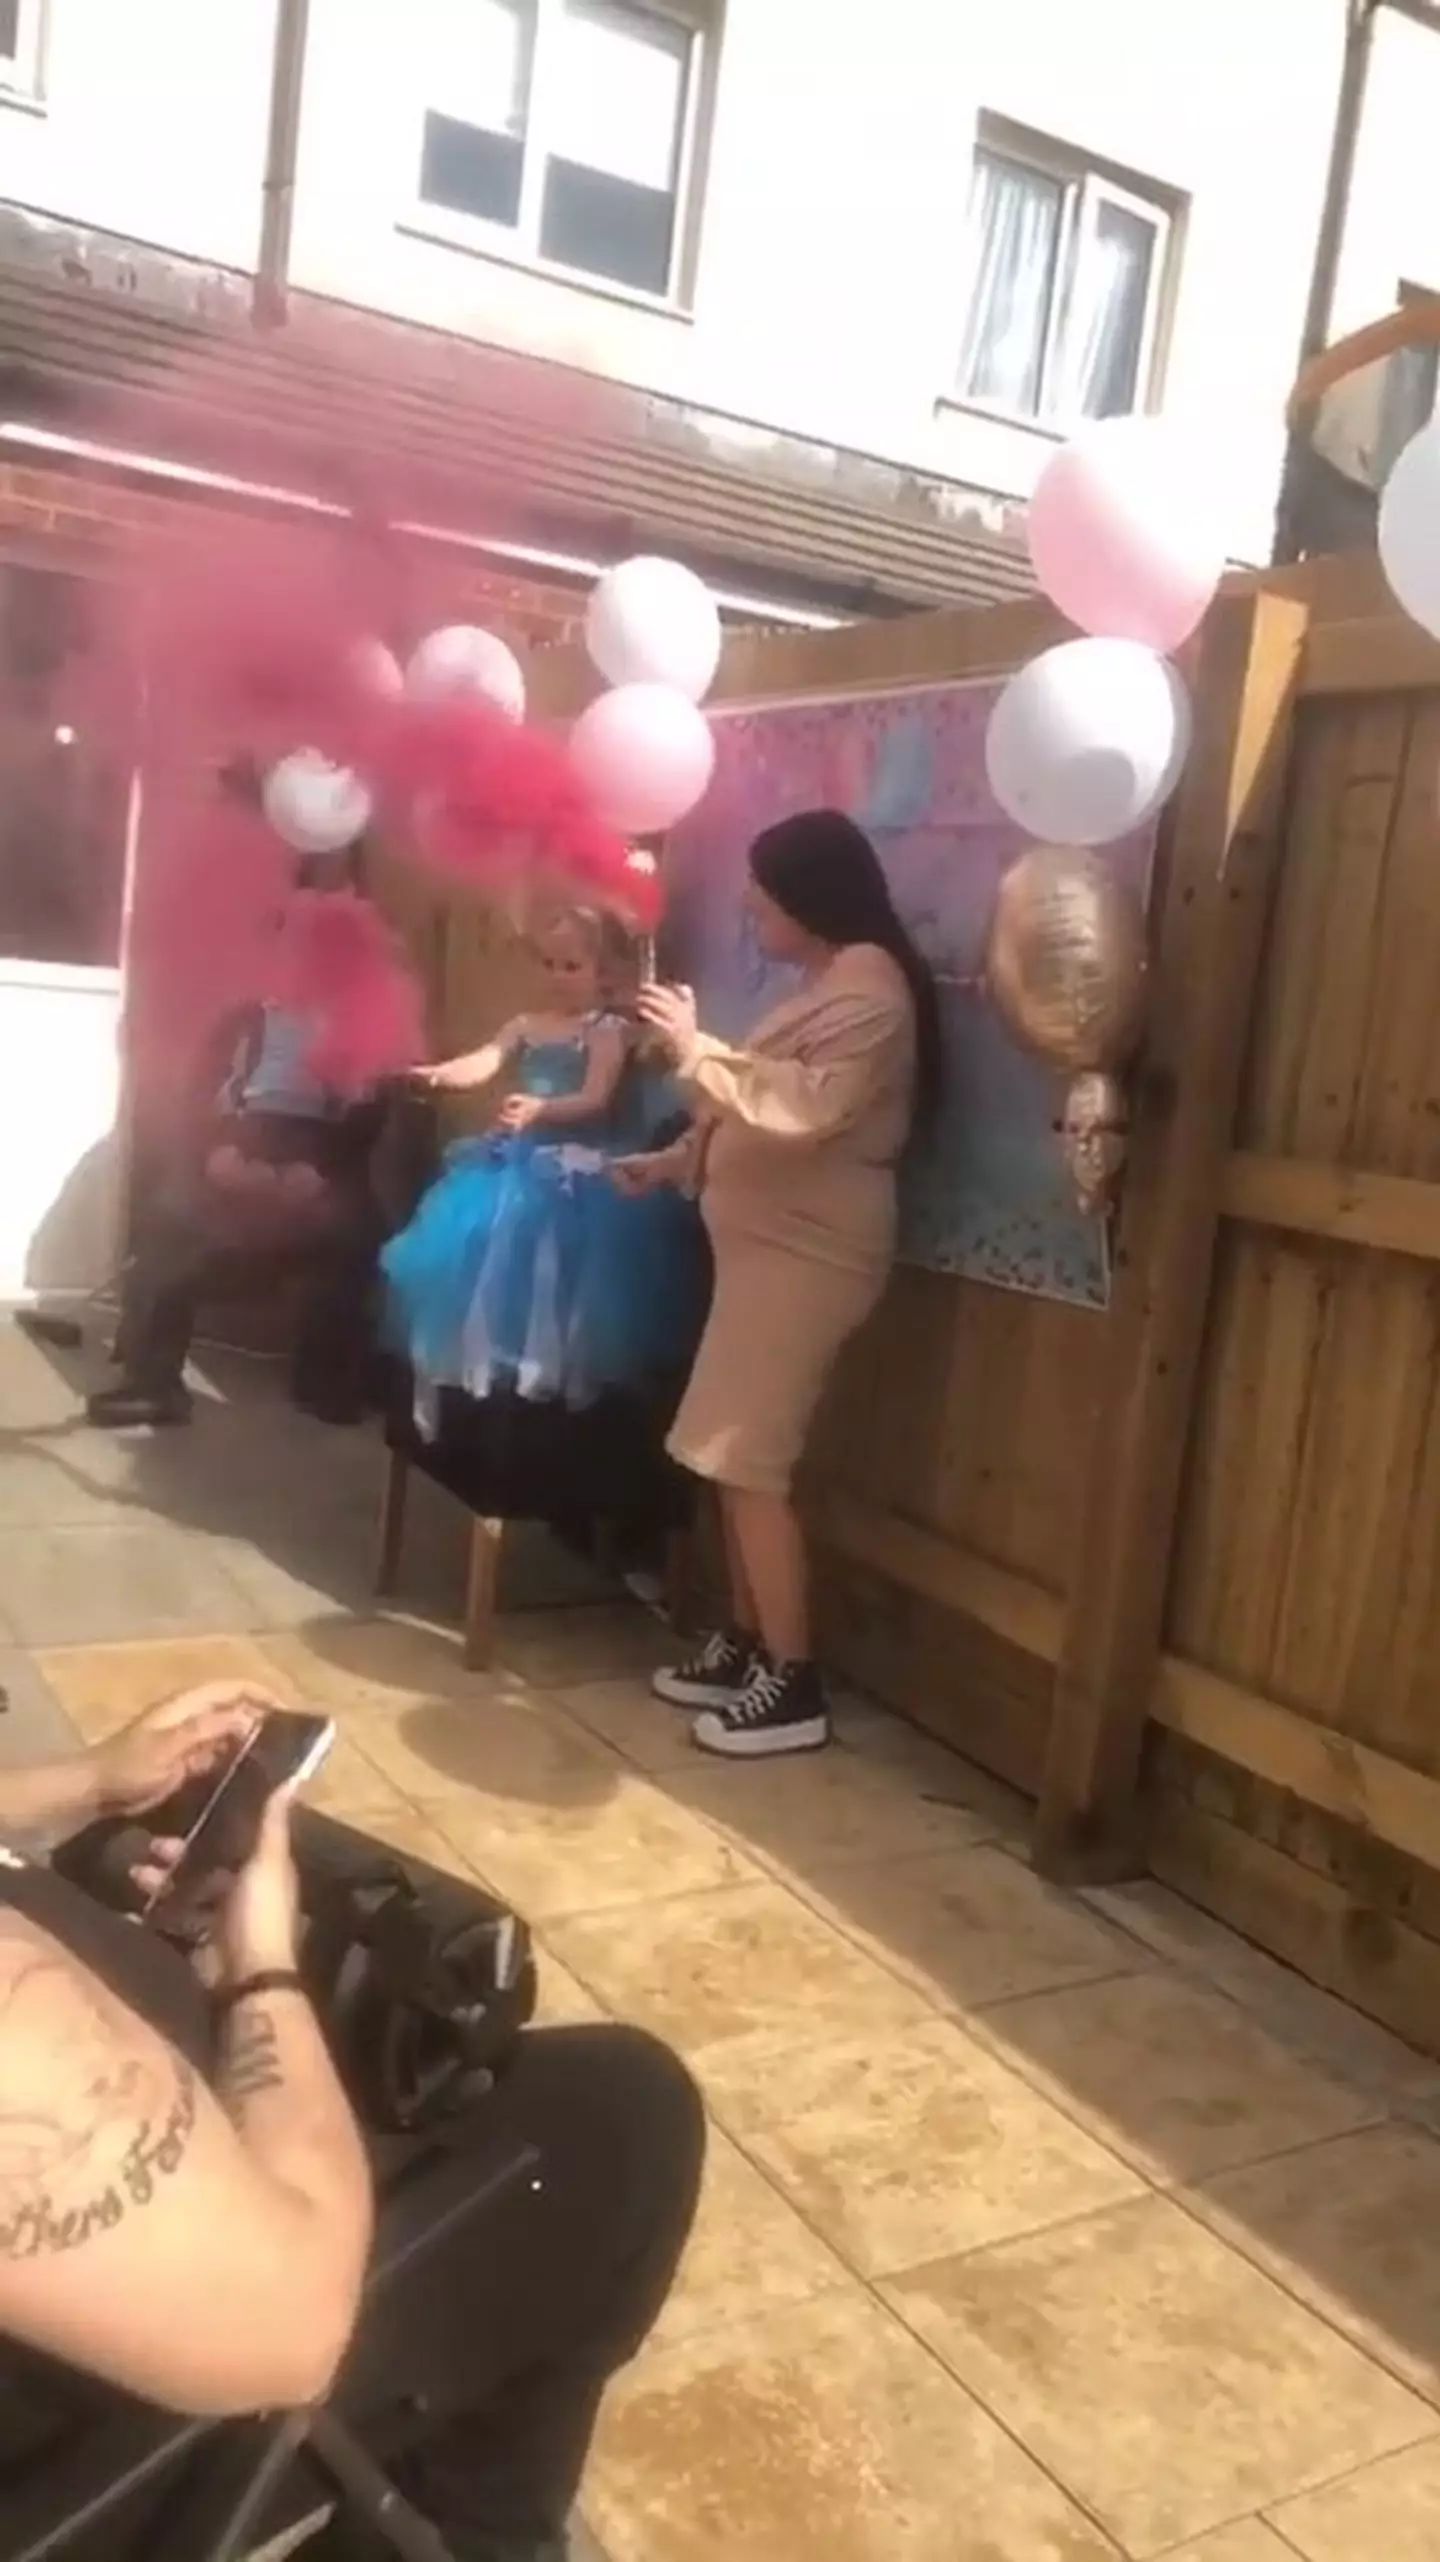 At first the reveal went well and her family could be heard clapping (